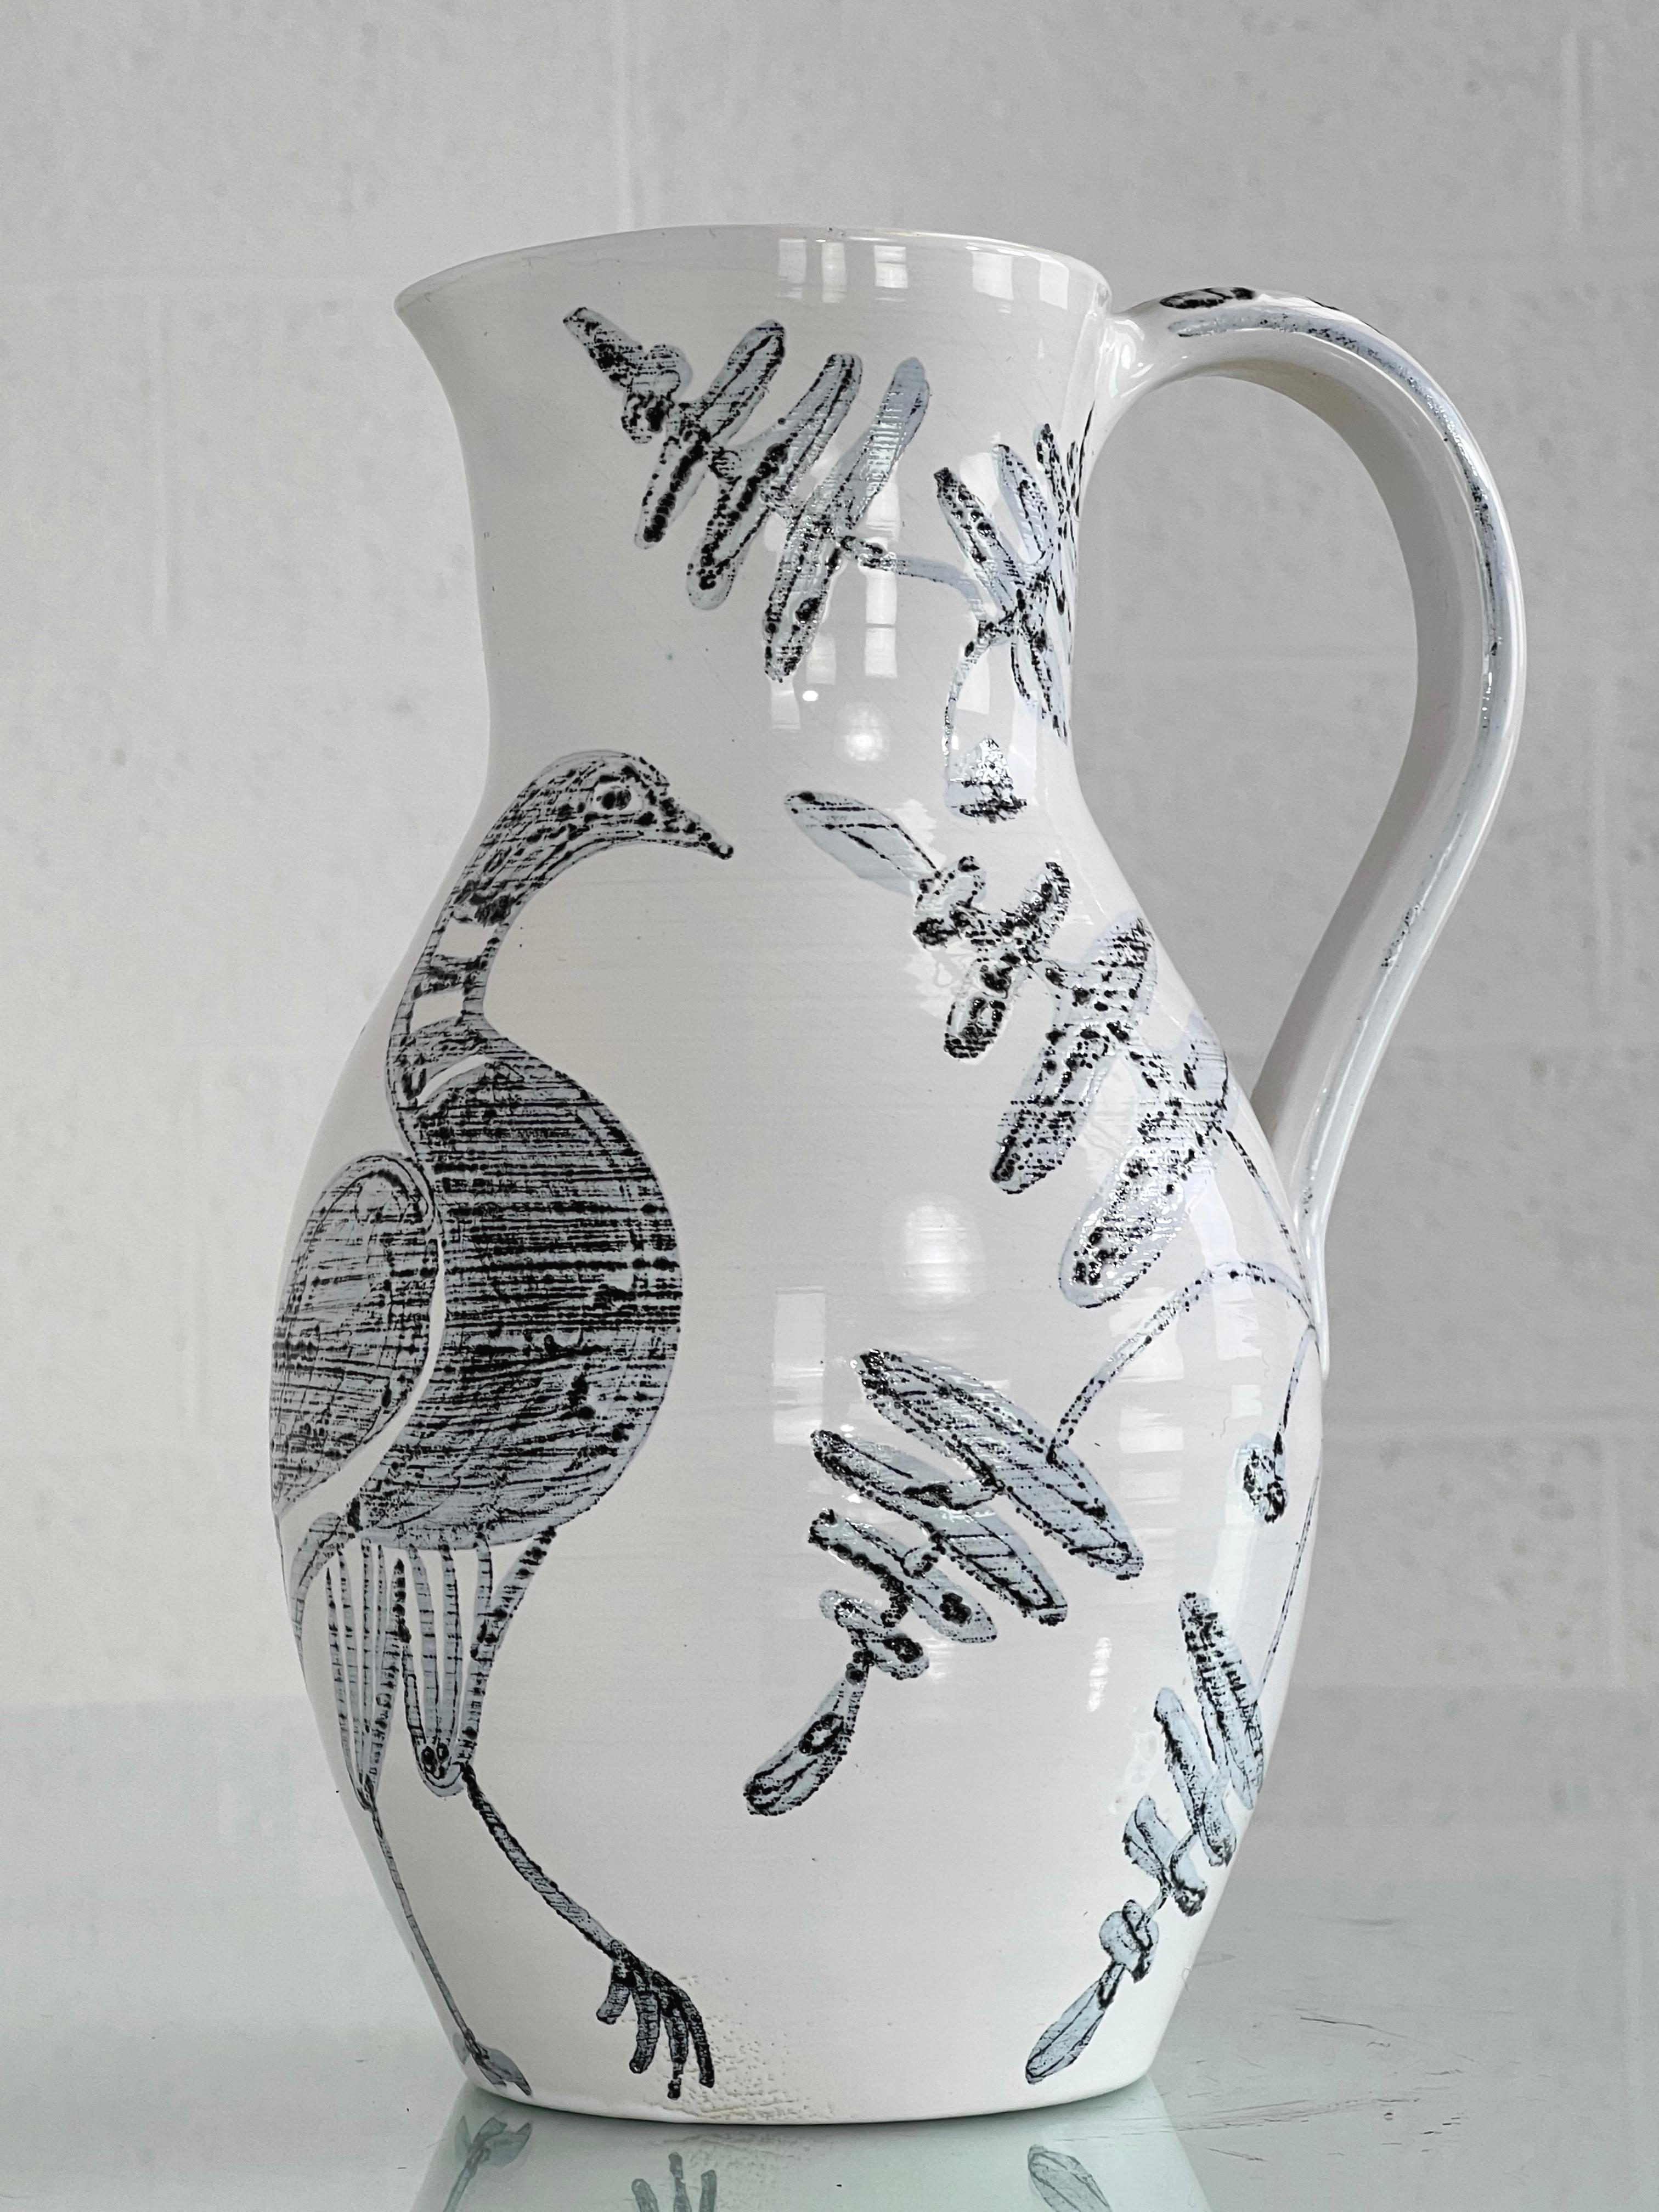 1960s Handmade Ceramic Pitcher Vase with white color glaze and adorned with peacock scene